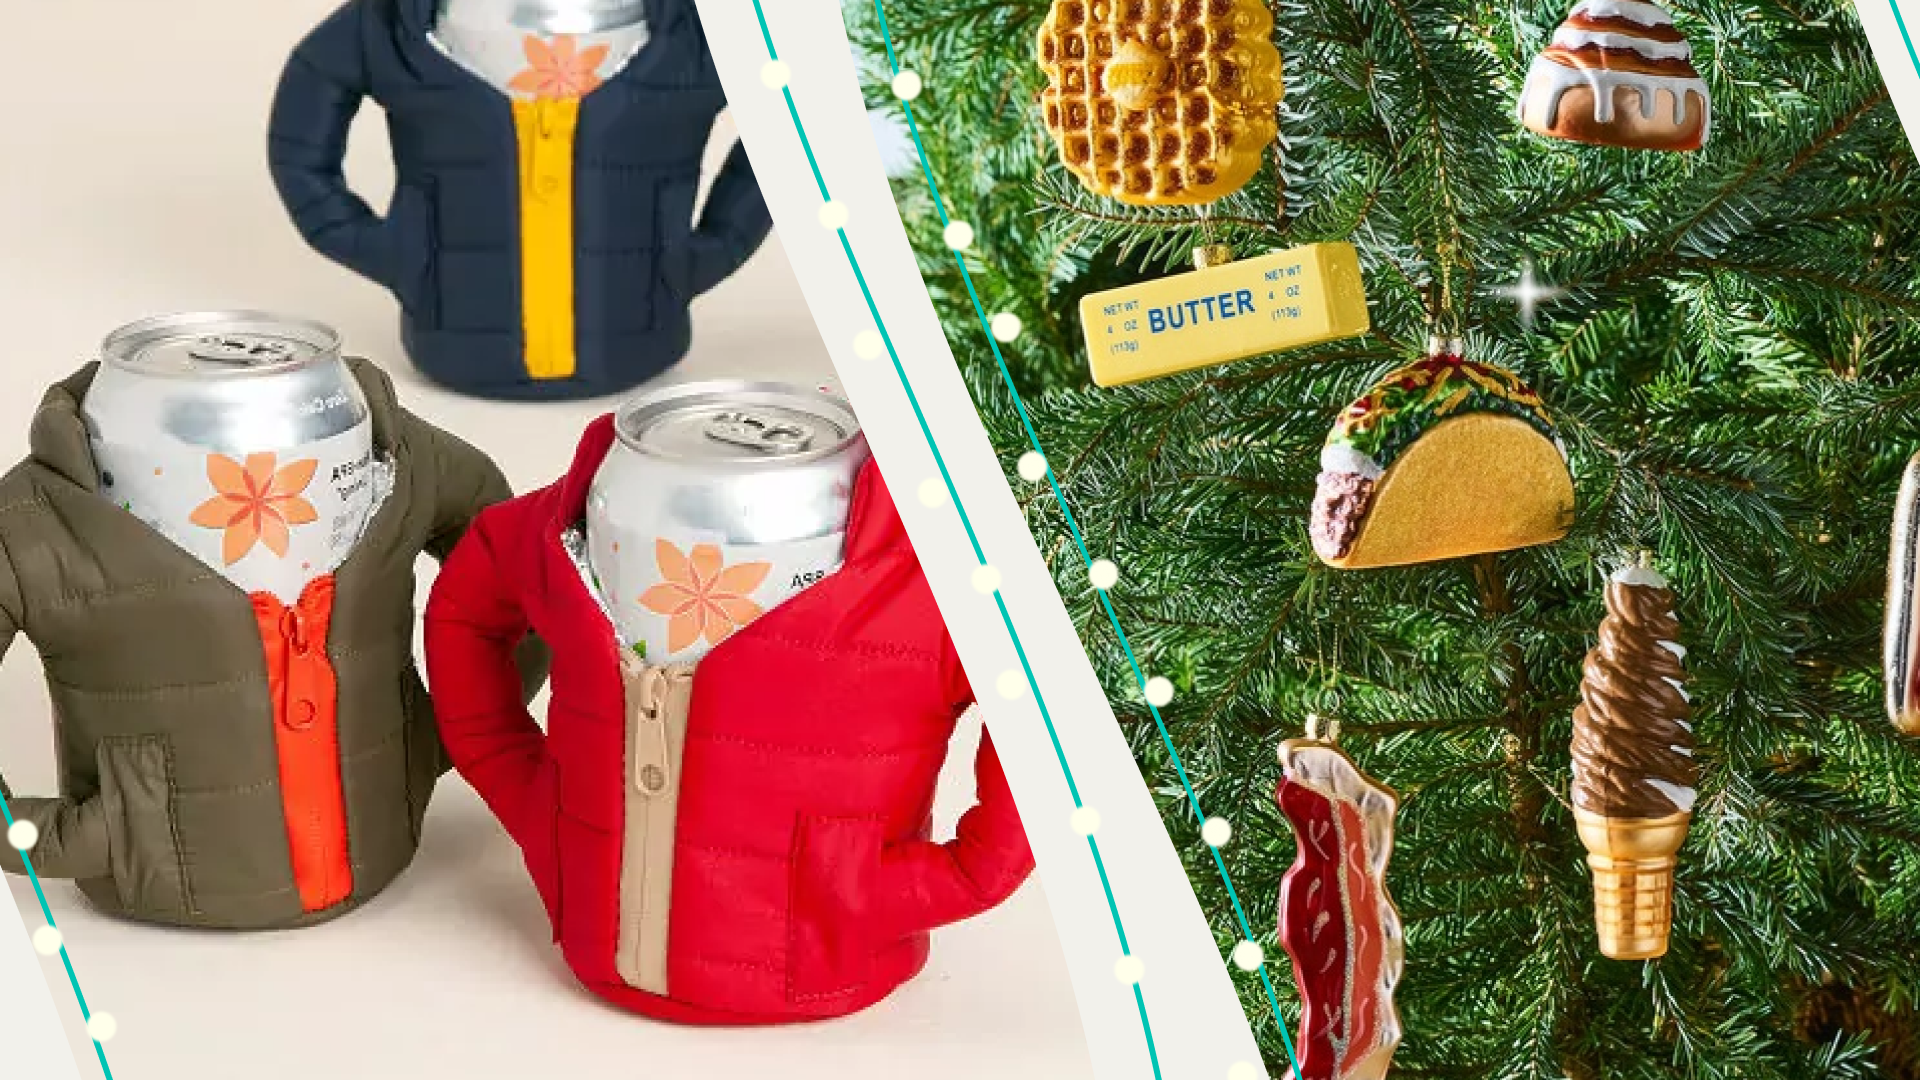 10 Awesome White Elephant Gift Ideas Under $30, The Sassy Southern